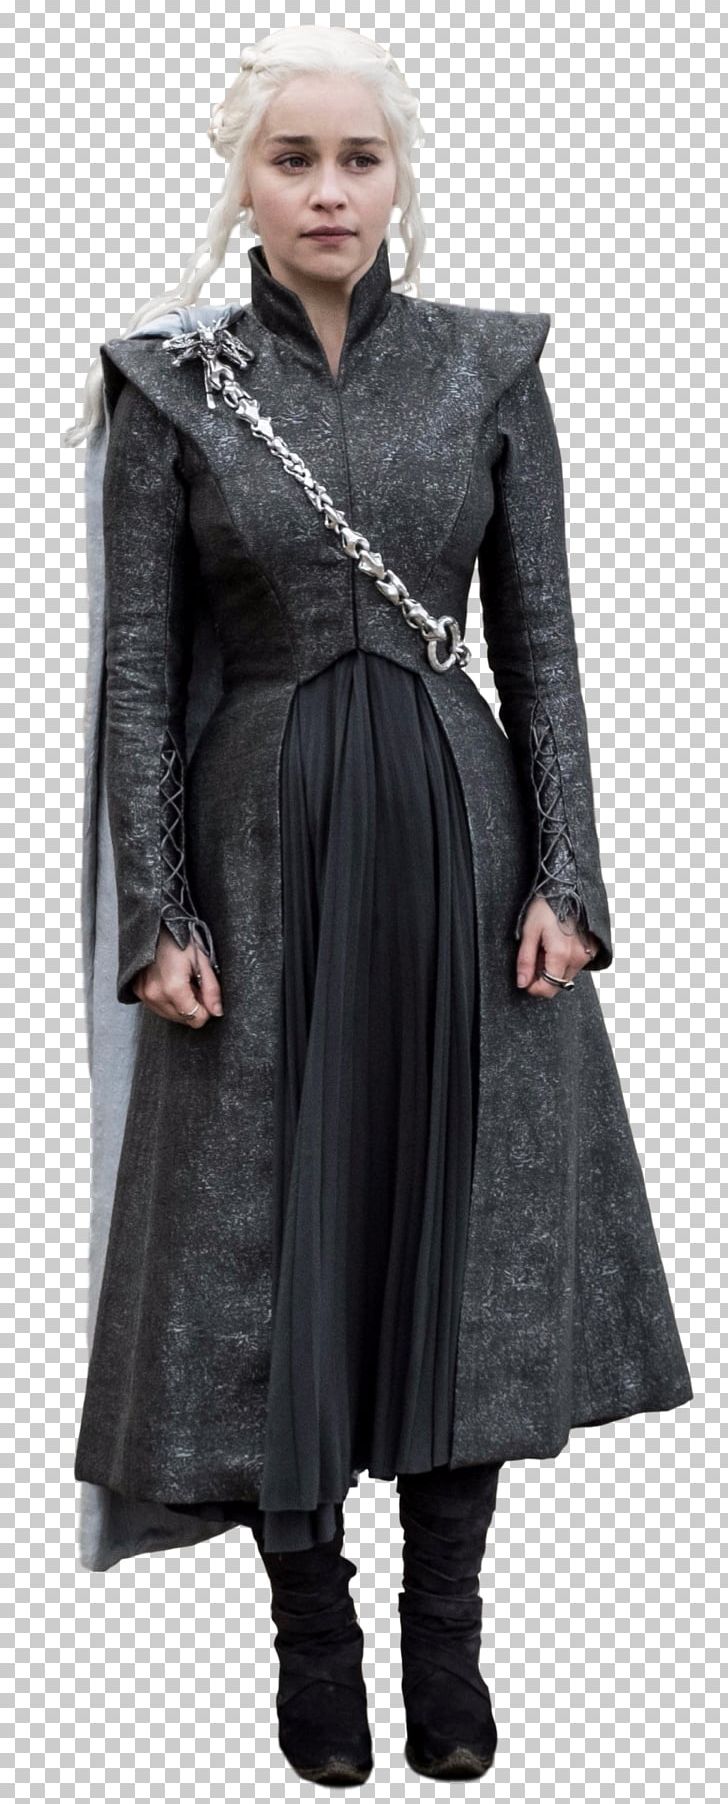 Daenerys Targaryen Game Of Thrones PNG, Clipart, Clothing, Coat, Comic, Cosplay, Costume Free PNG Download